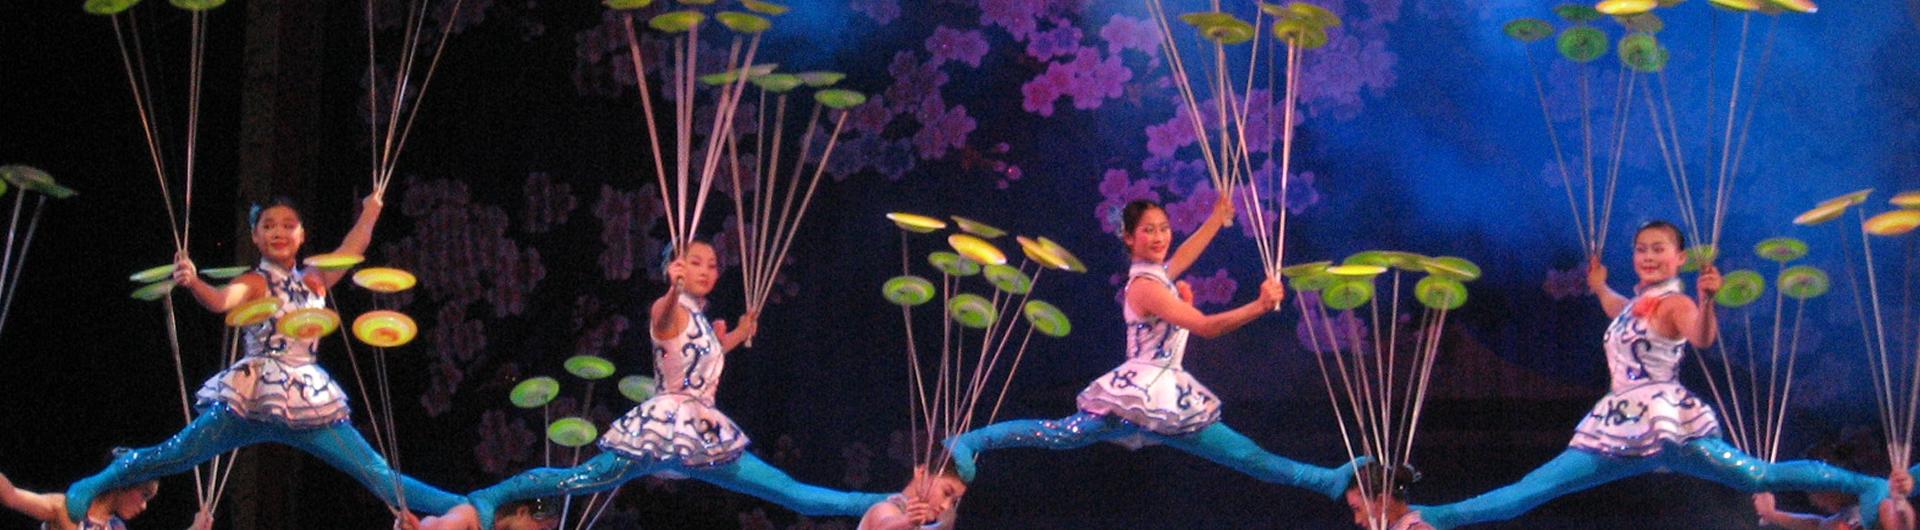 Members of The Peking Acrobats on stage plate spinning together in formation.